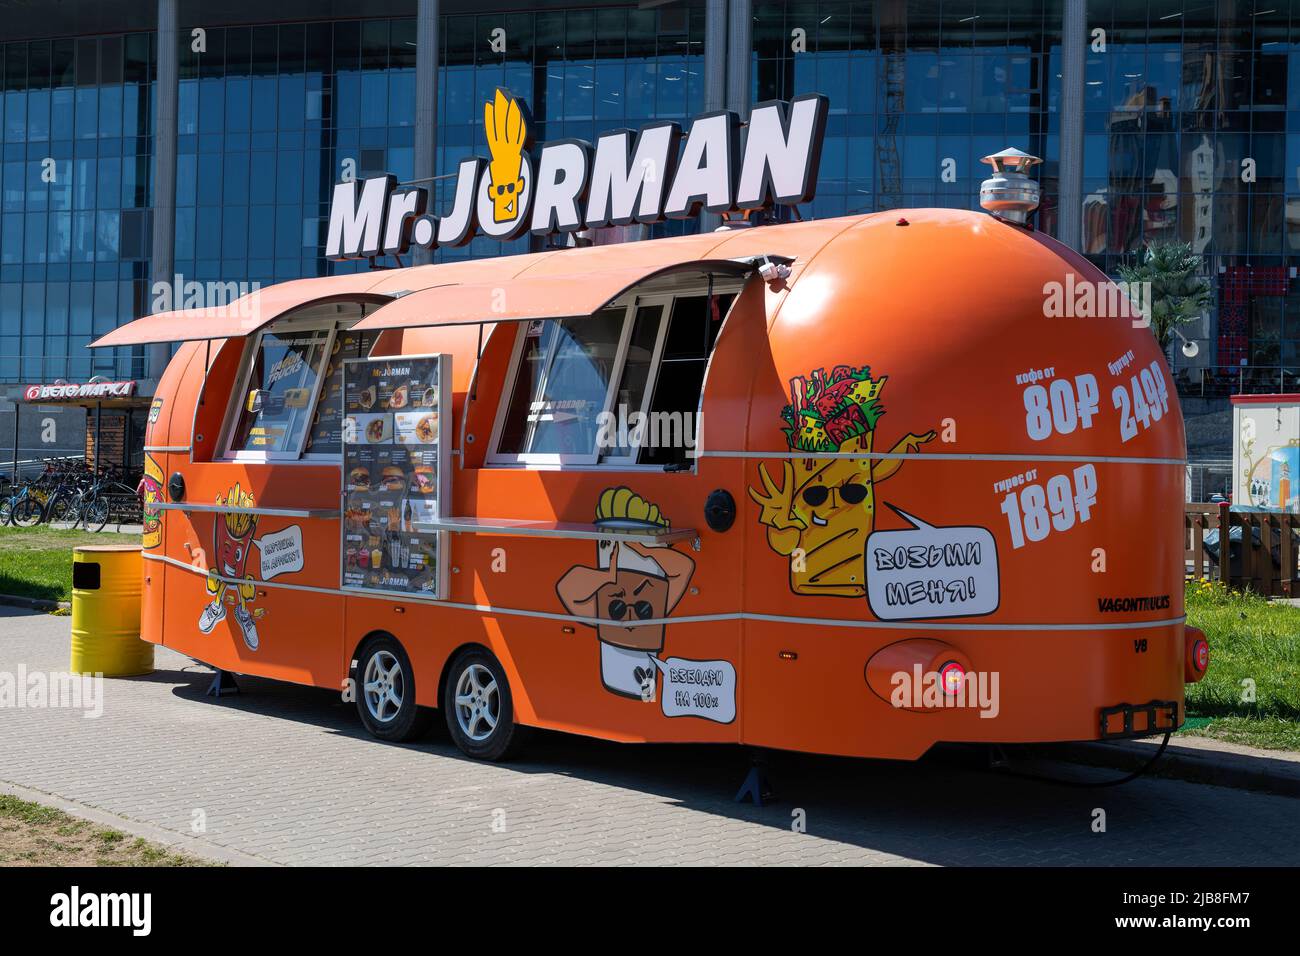 ST. PETERSBURG, RUSSIA - MAY 22, 2022: Food truck of the Mr.JORDAN food chain close-up on a sunny May day Stock Photo